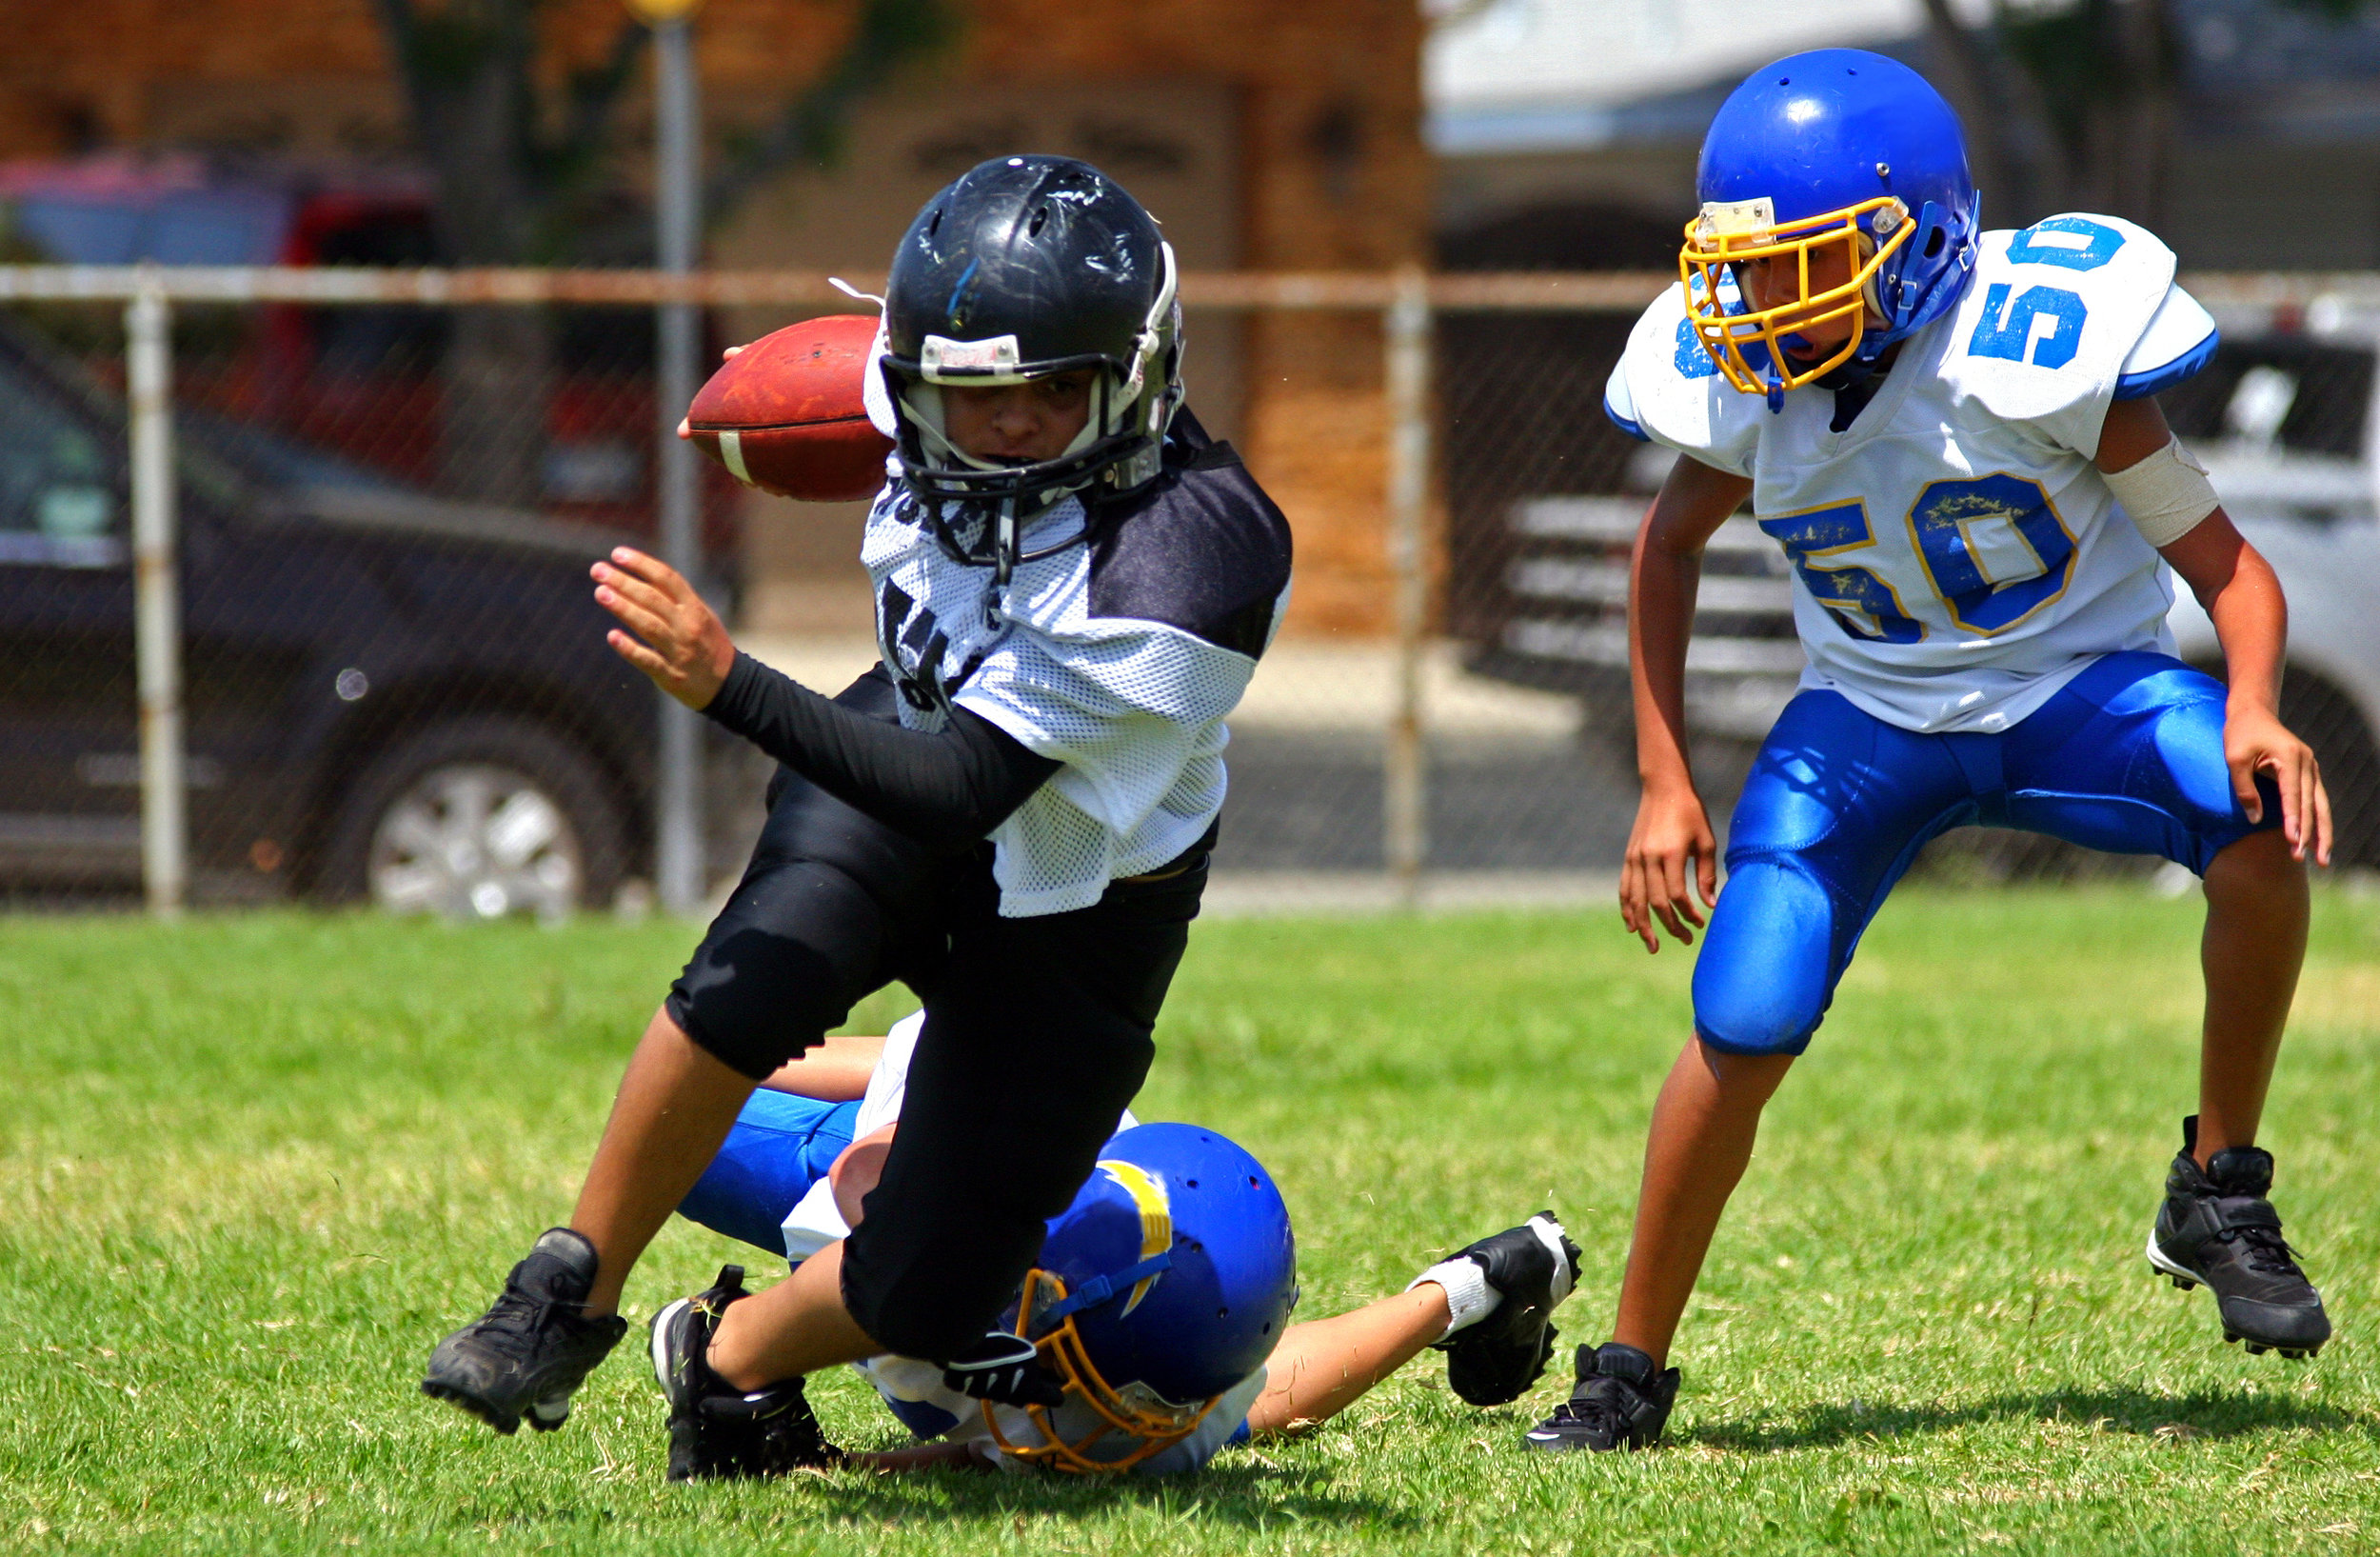 Protect Your Teeth and Avoid Concussions with Mouth Guards